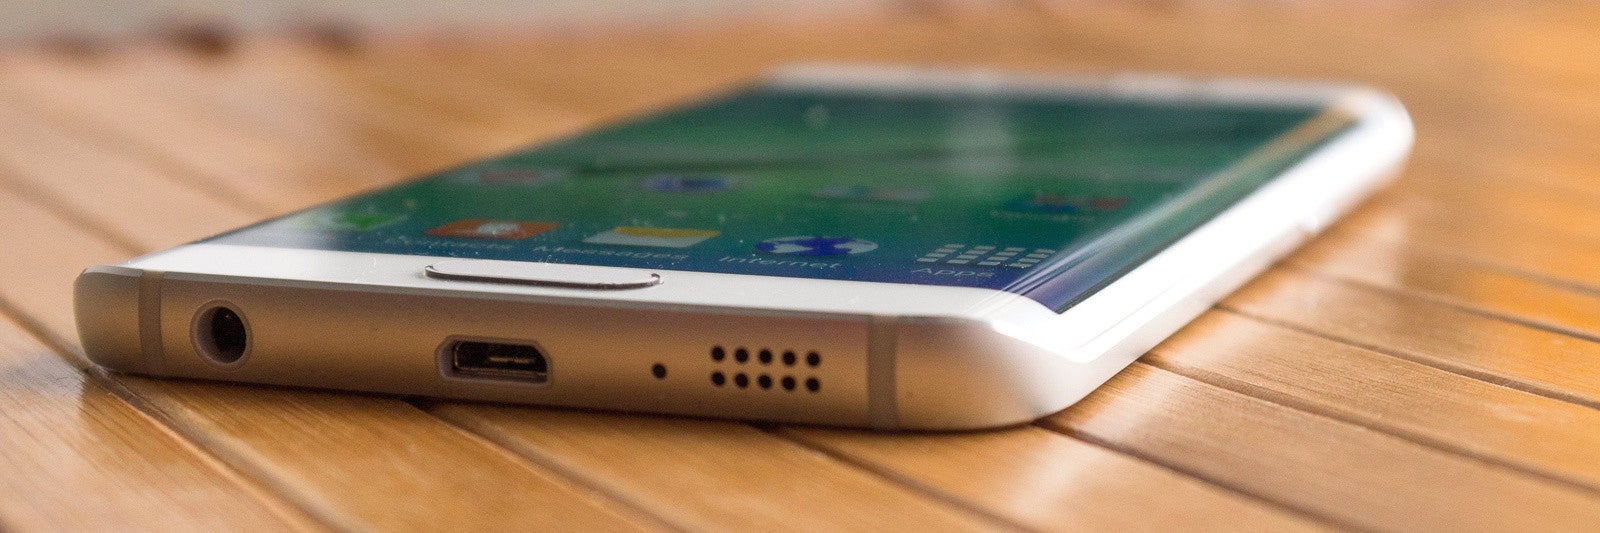 Samsung Galaxy S6 and S6 edge: reviews, cases, tips and tricks round-up